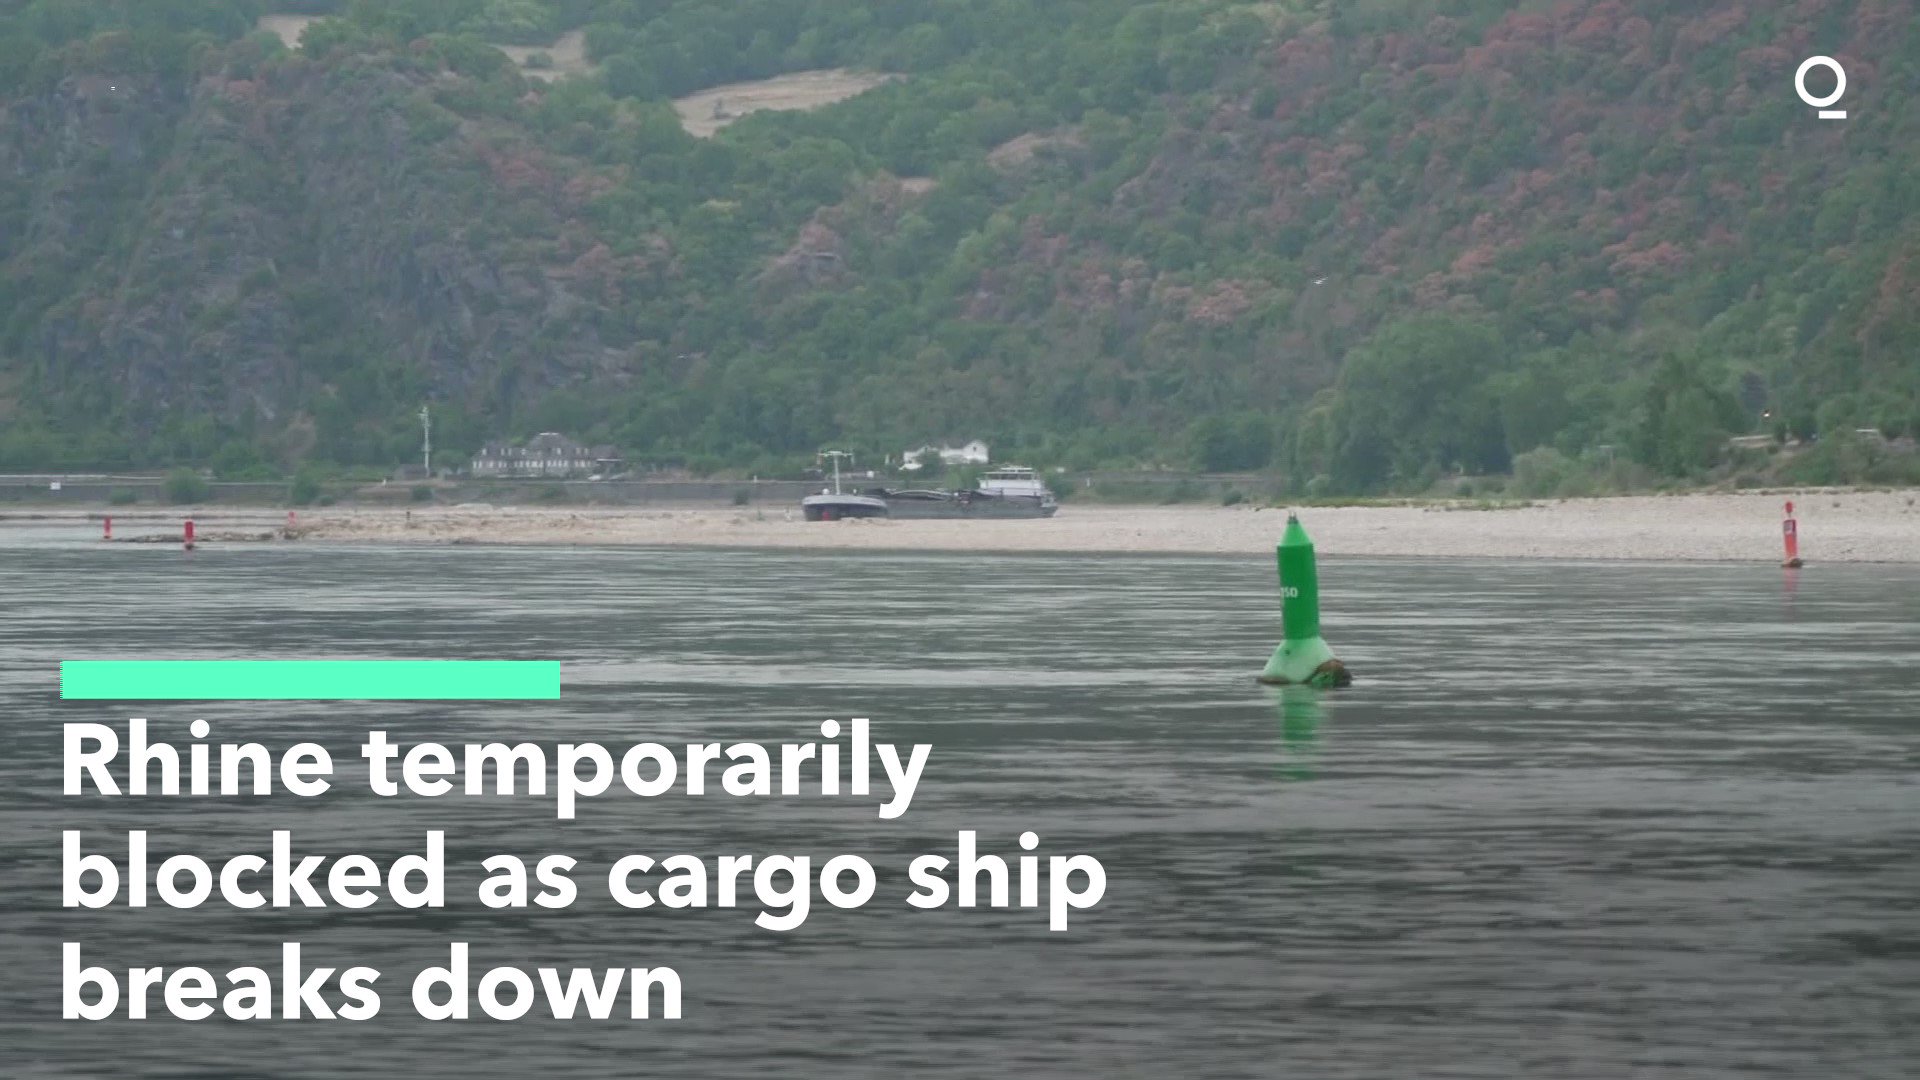 @Quicktake: A cargo ship that broke down on the Rhine River caused a backup of other ships near the German town of St. Goar